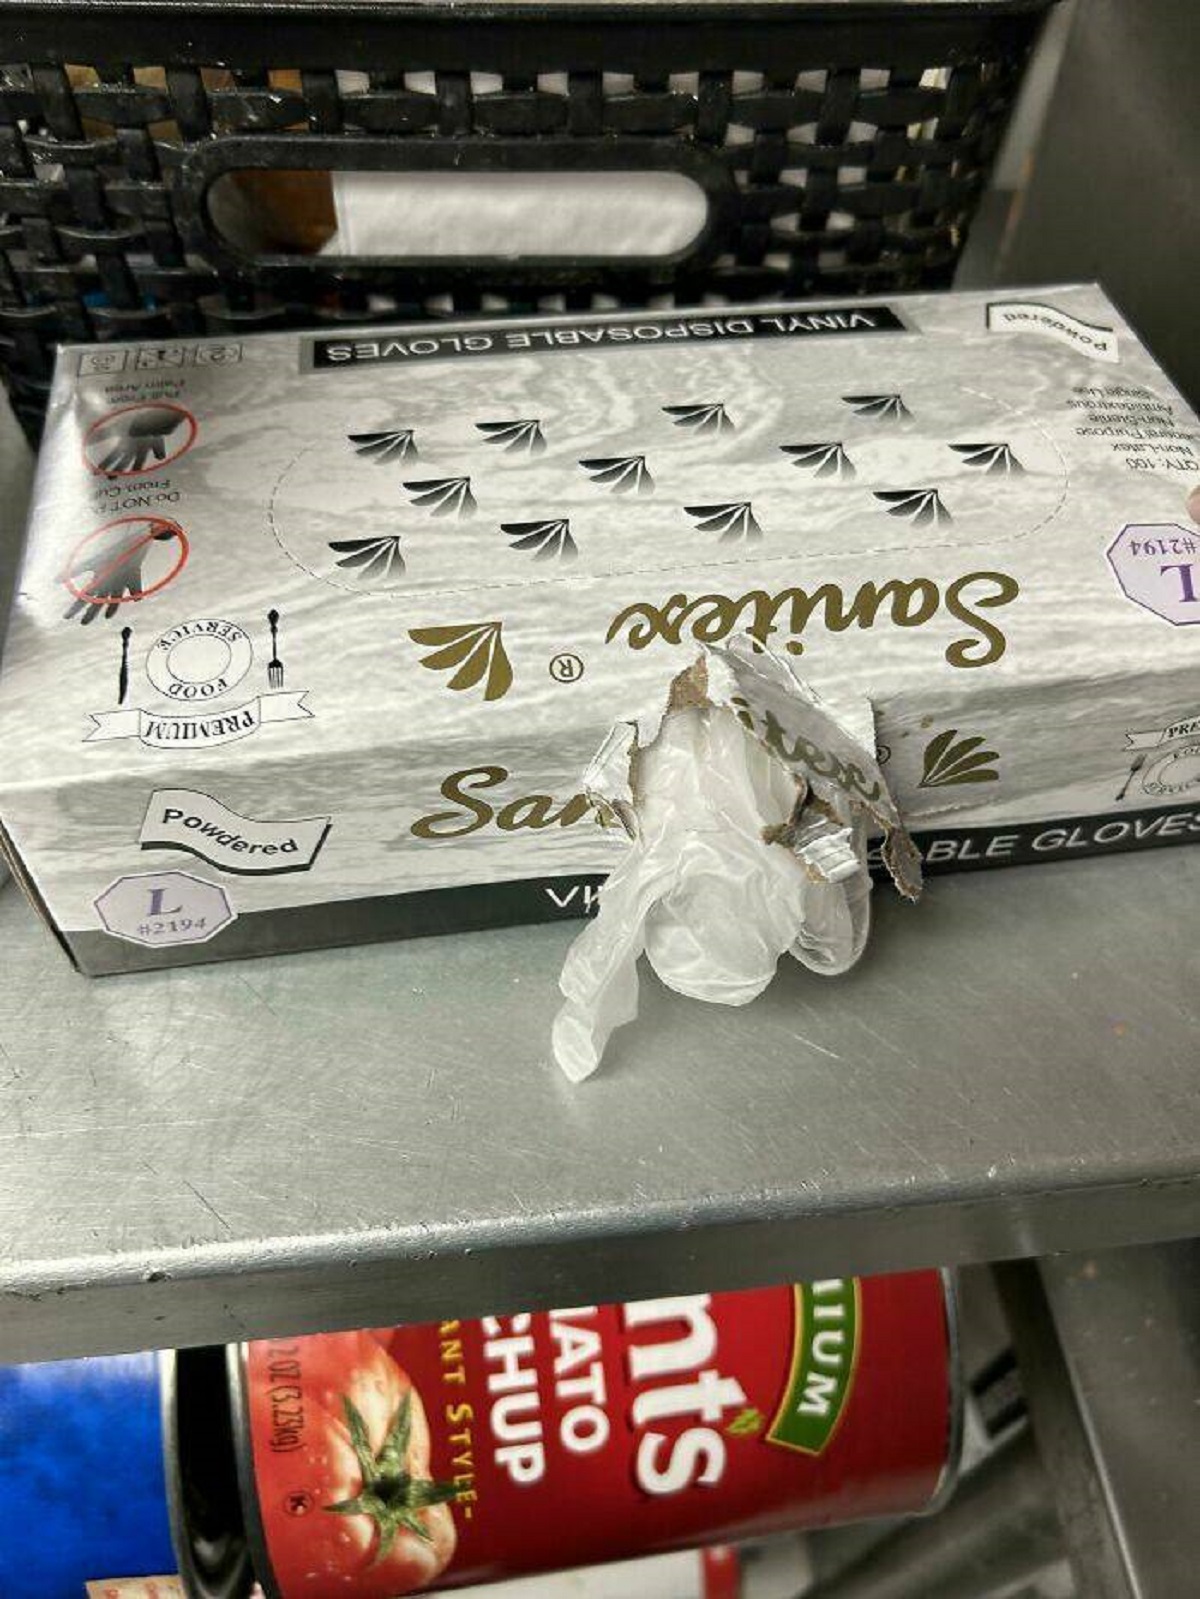 "How My Coworker Opens A Box Of Gloves With A Perforated Top"